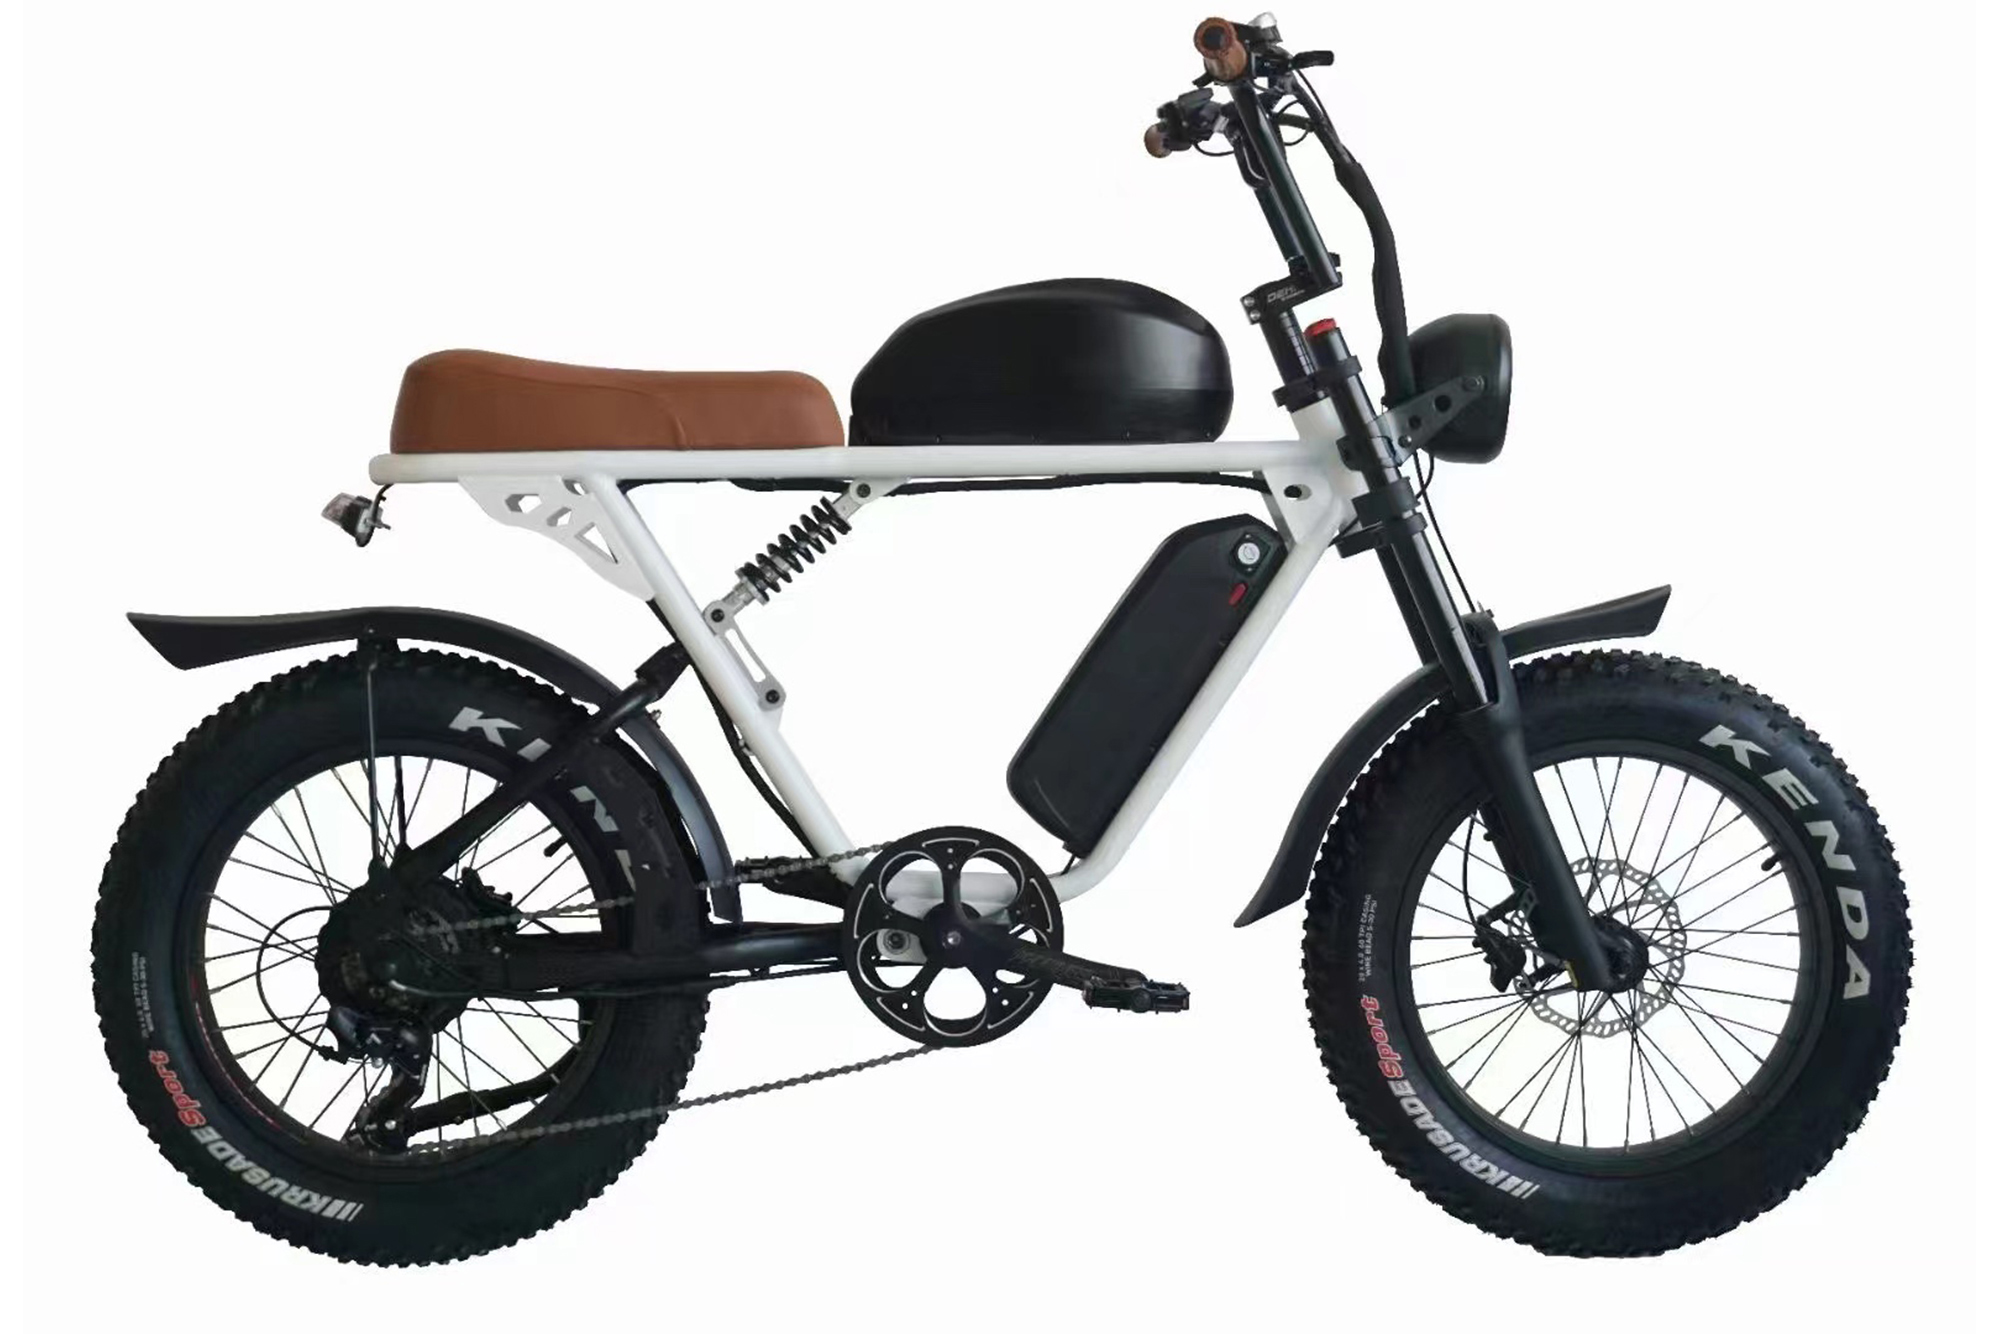 FANTAS SUPER73 Knight001 20inches fat tire lithium battery electric bicycle harley for snow and beach